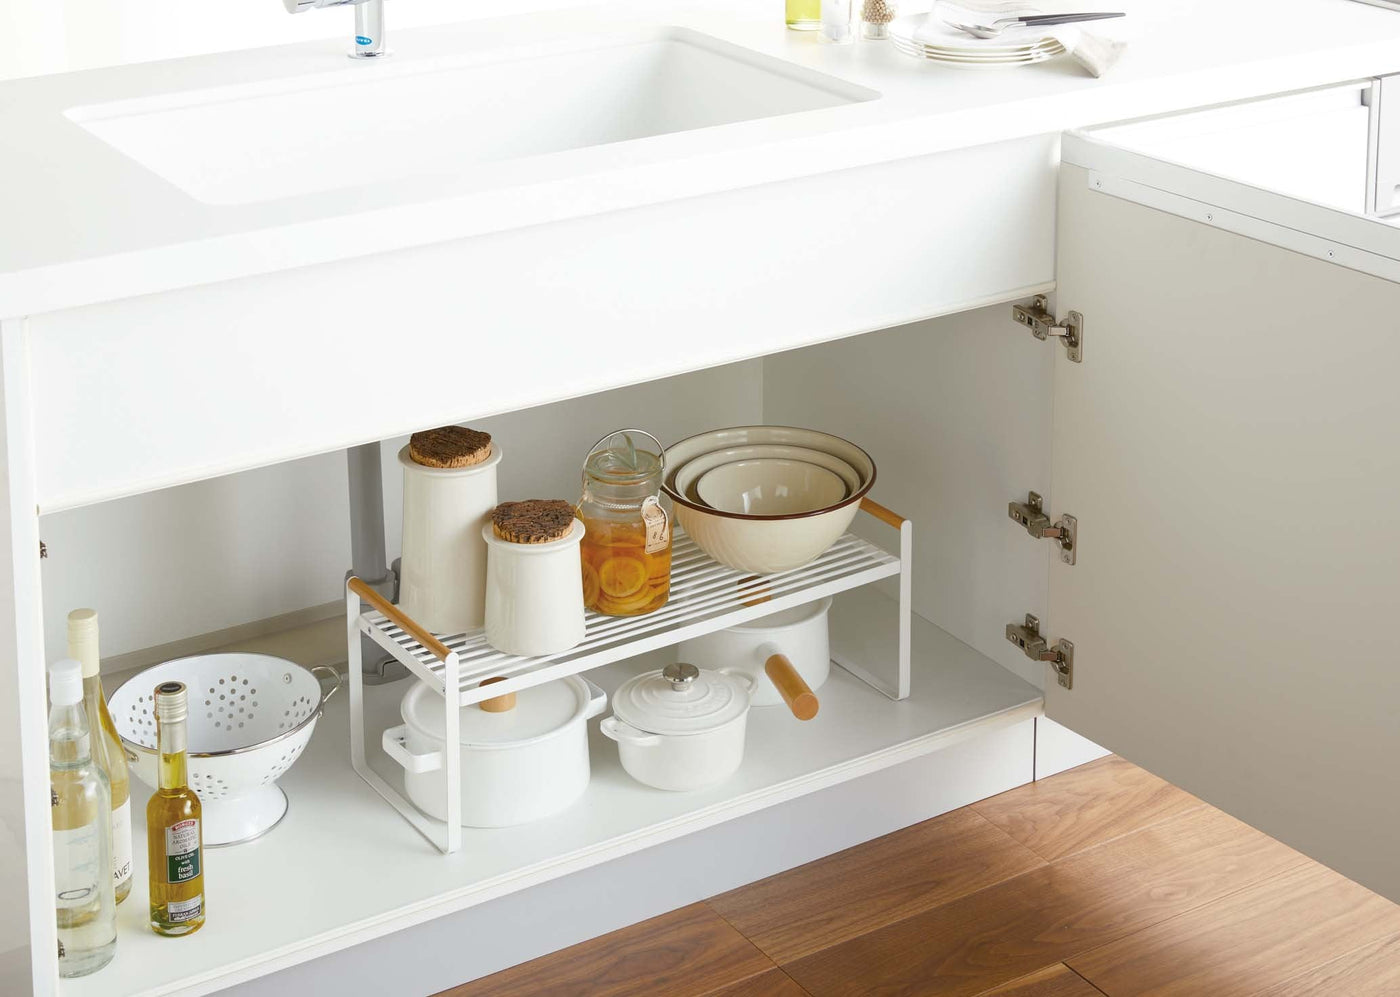 Yamazaki Wired Organizer Rack being used in an under-sink cabinet, stocked with kitchen items